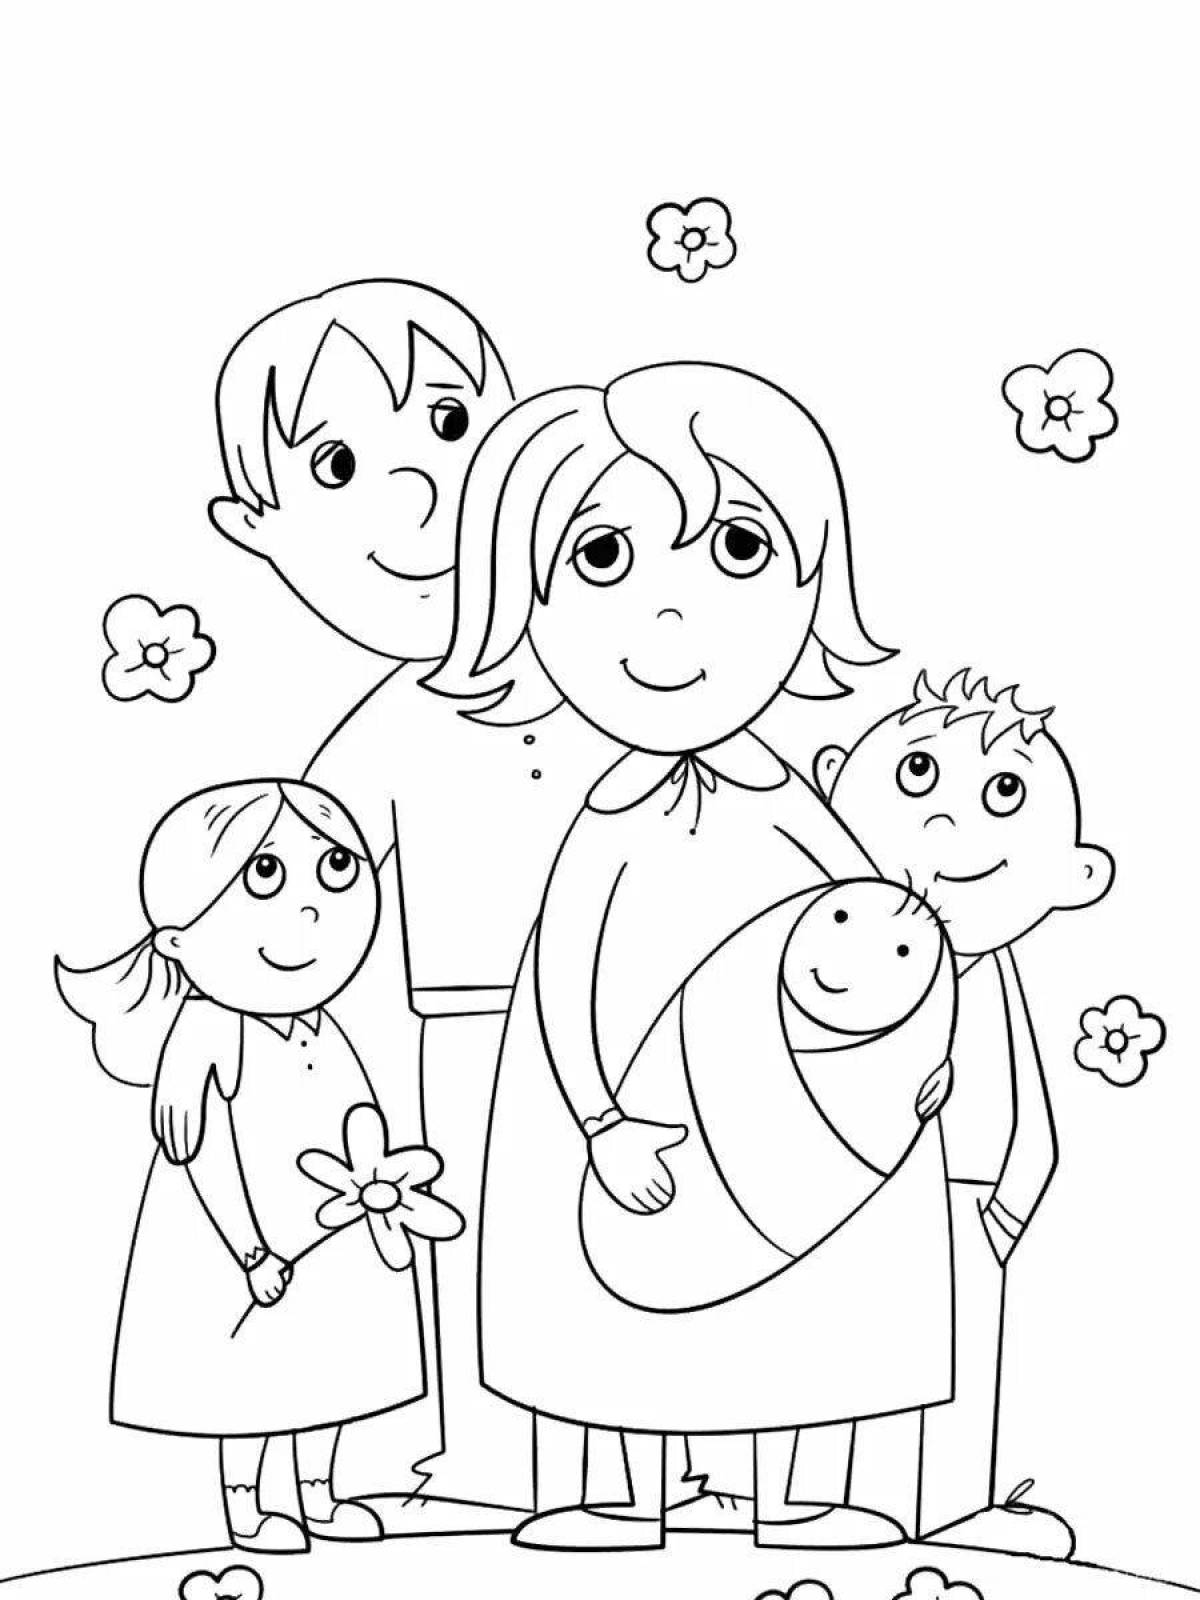 Encouraging family coloring book